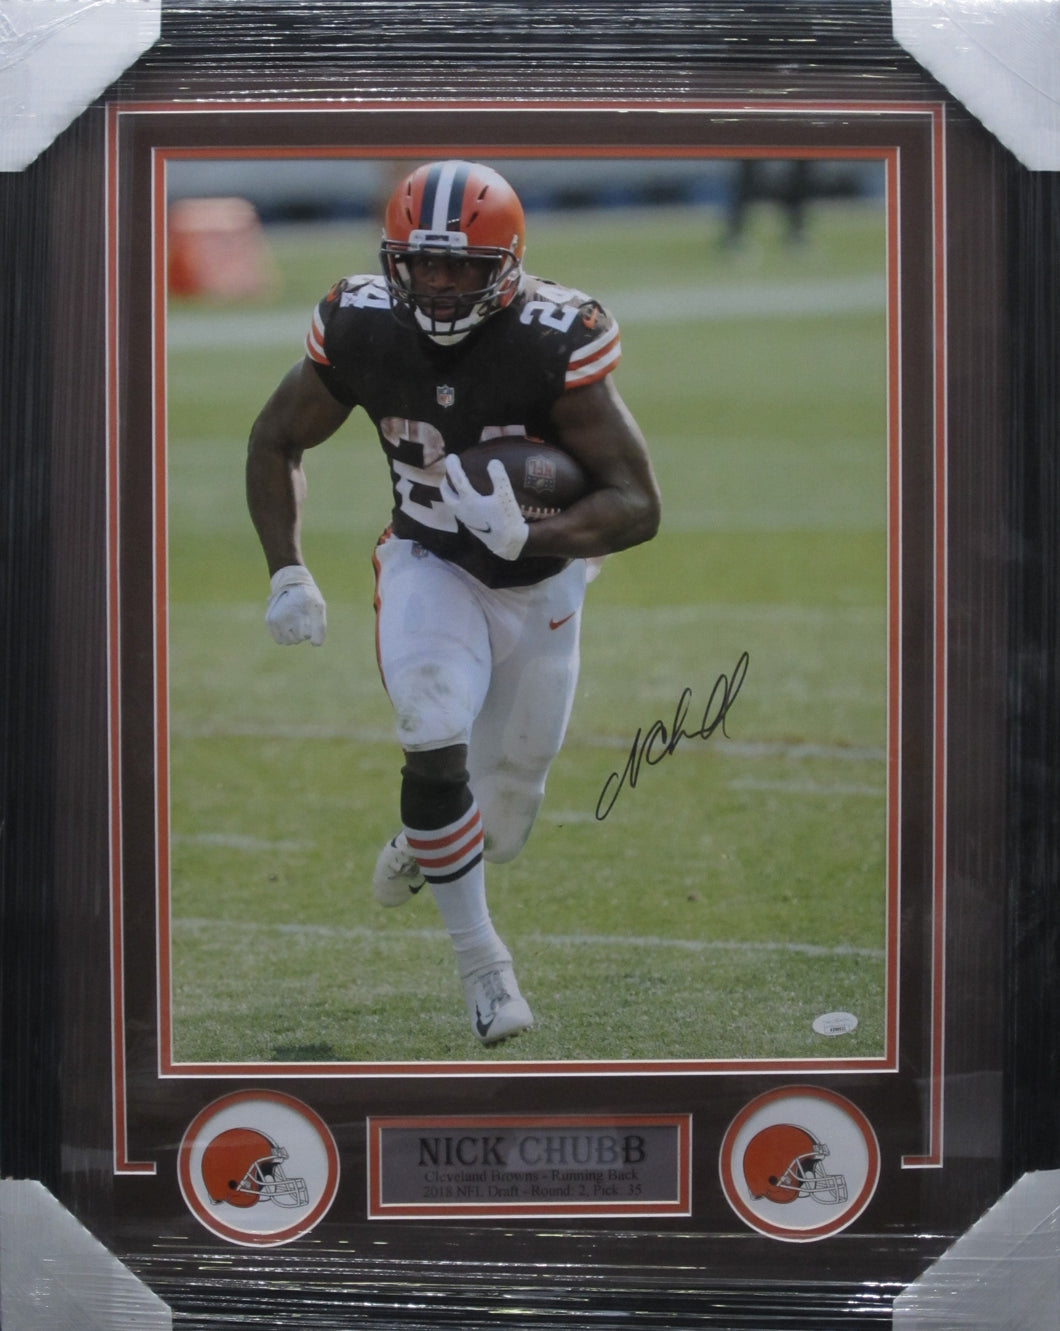 Cleveland Browns Nick Chubb Signed 16x20 Photo Framed & Matted with JSA COA